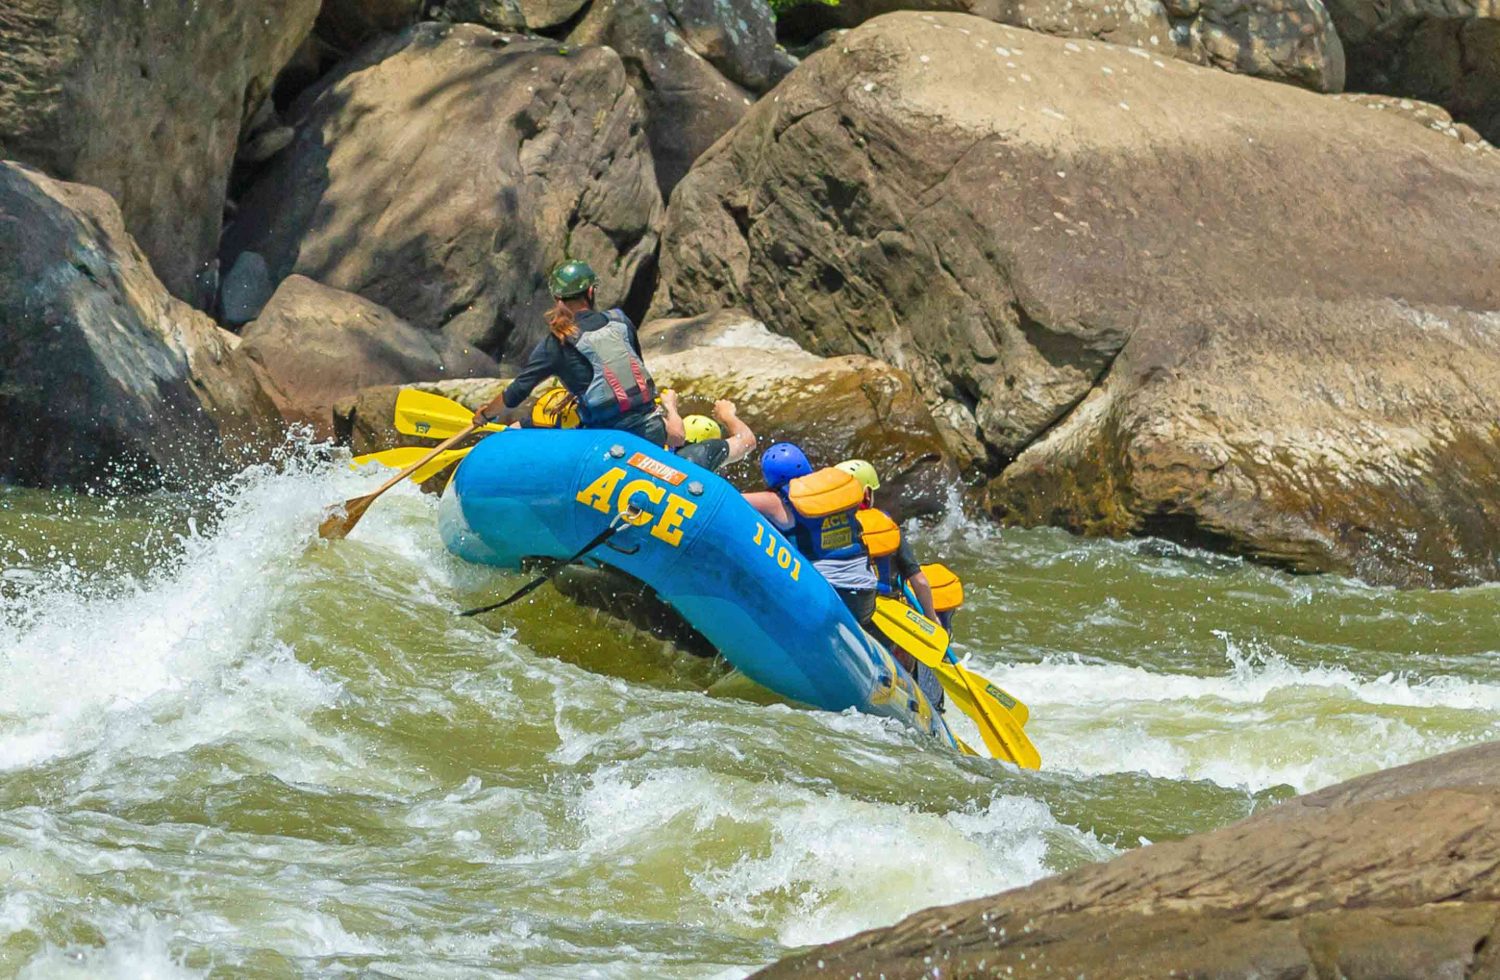 An ACE raft paddles out the bottom of Lower Keeney Rapid during a New River Gorge white water rafting trip in West Virginia.